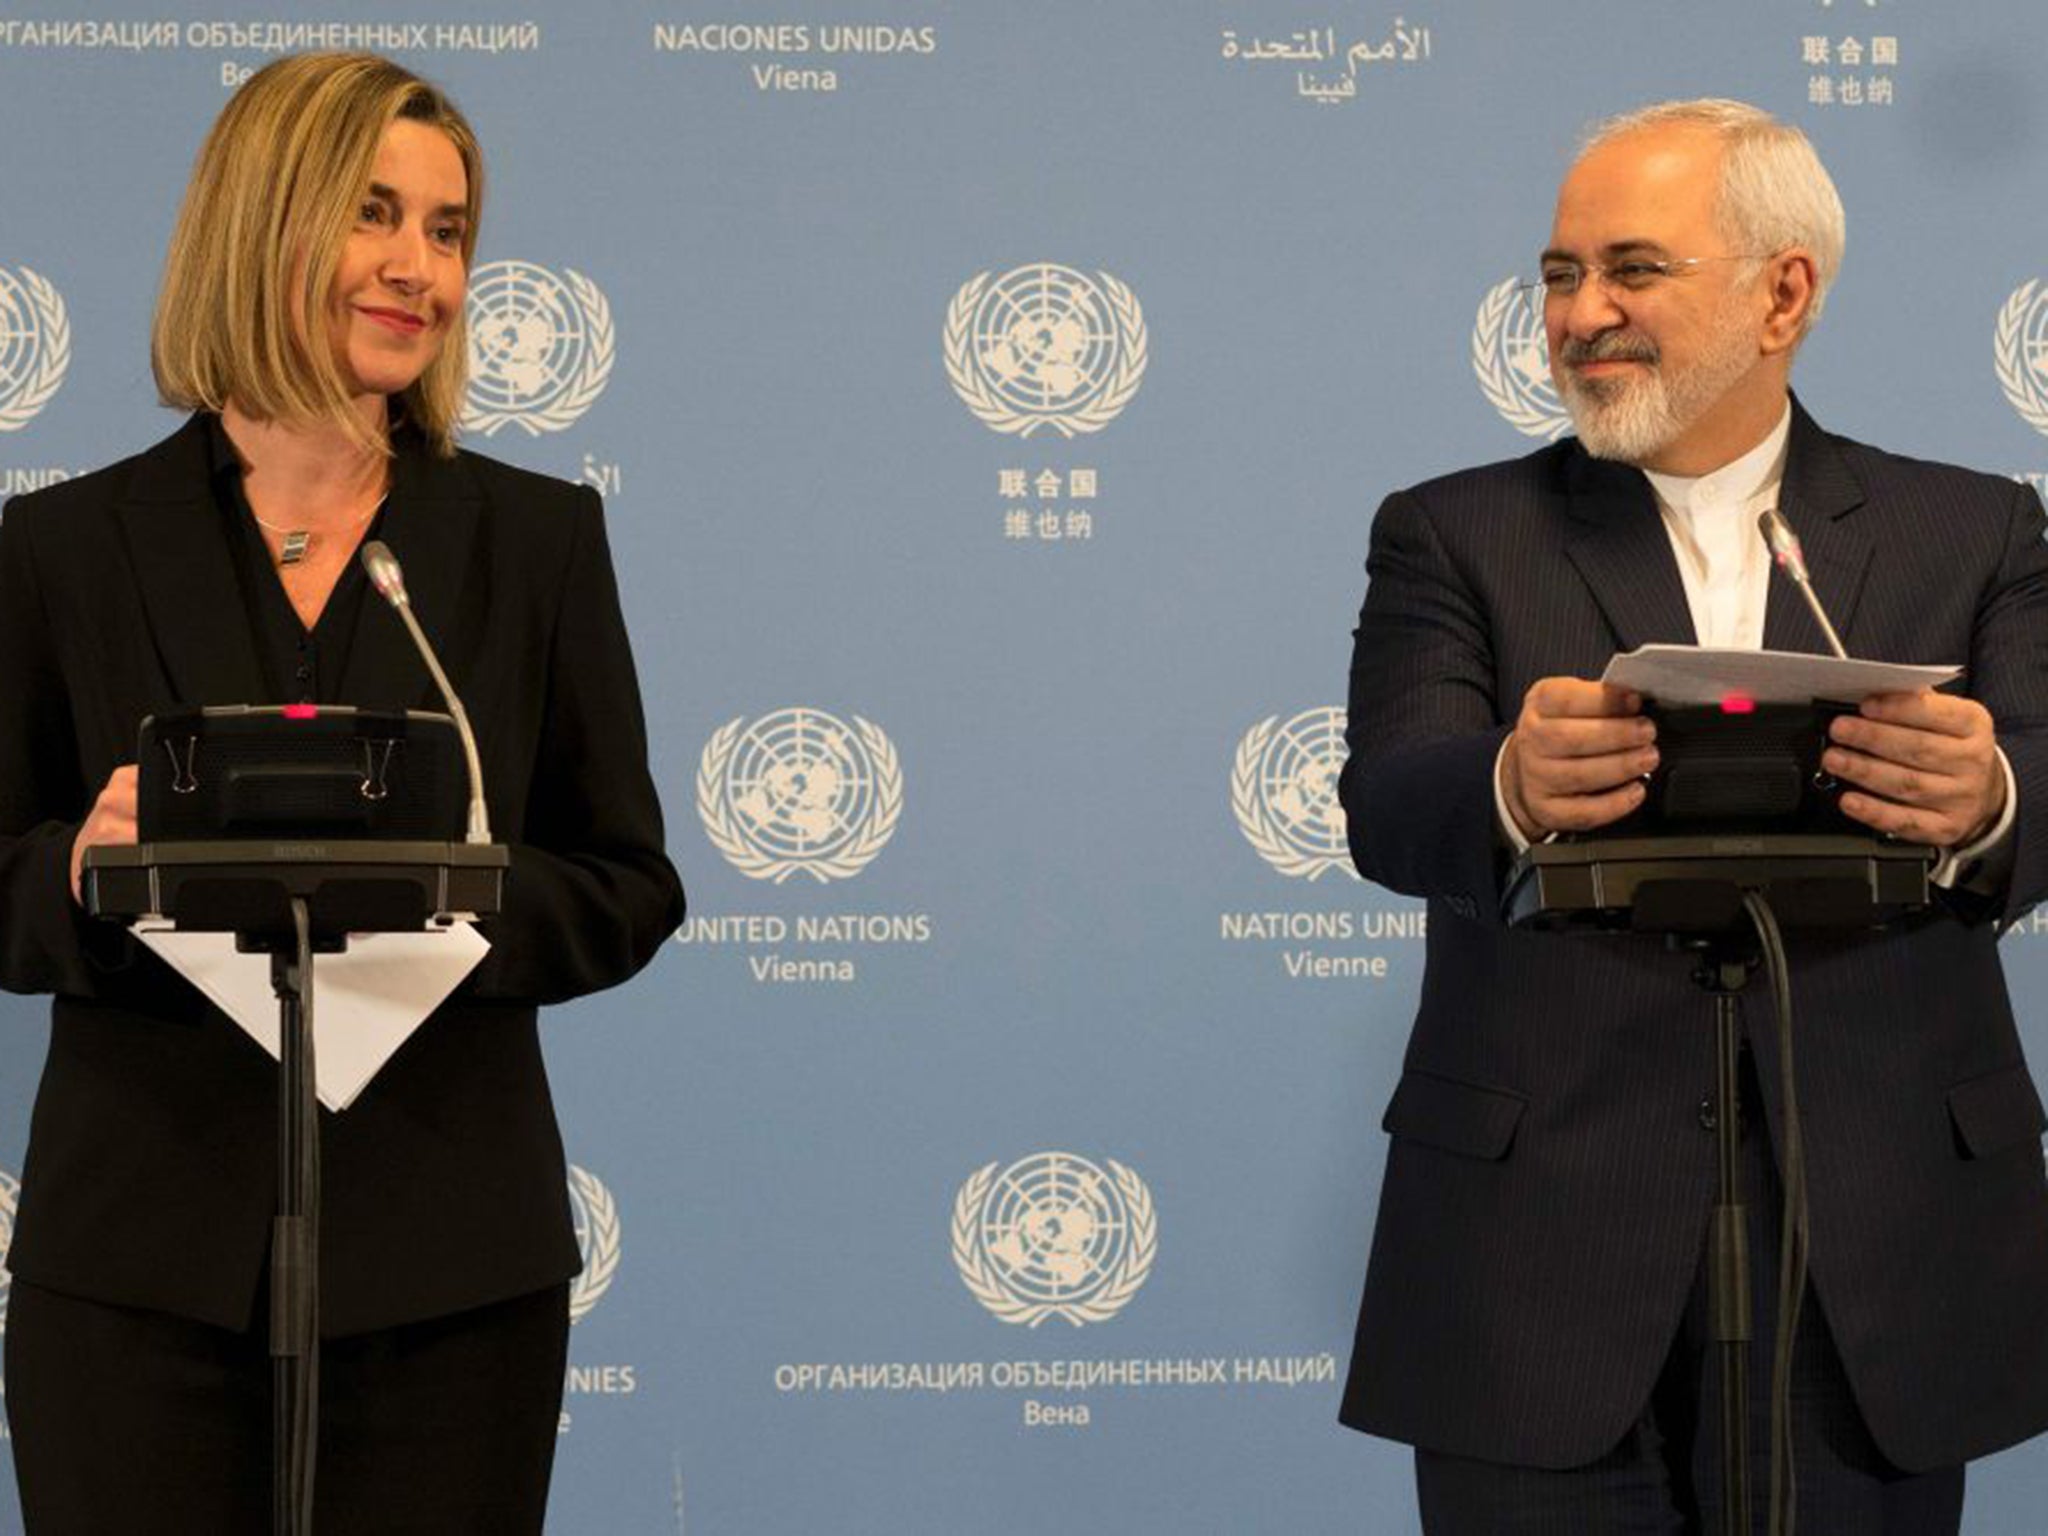 Iranian Foreign Minister Mohammad Javad Zarif, right, and EU foreign policy chief Federica Mogherini hold a joint press conference to make the announcement